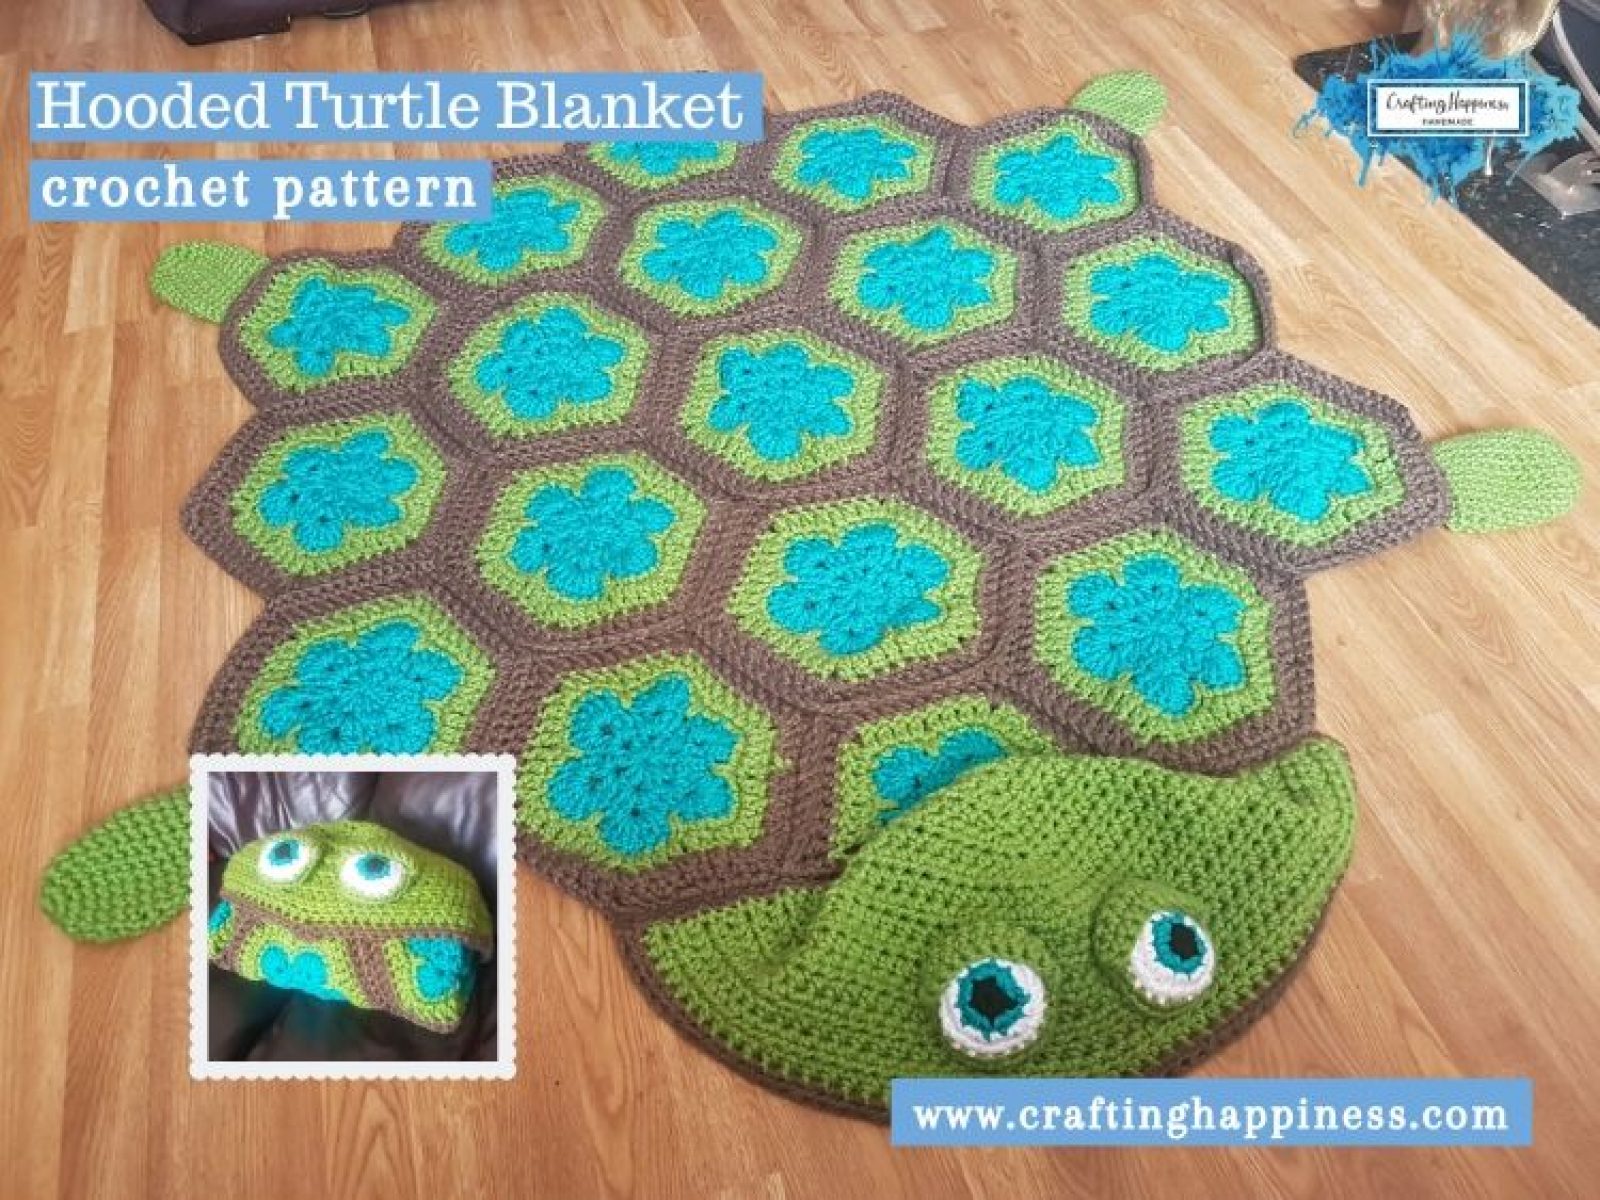 Hooded Turtle Blanket by Crafting Happiness FACEBOOK POSTER